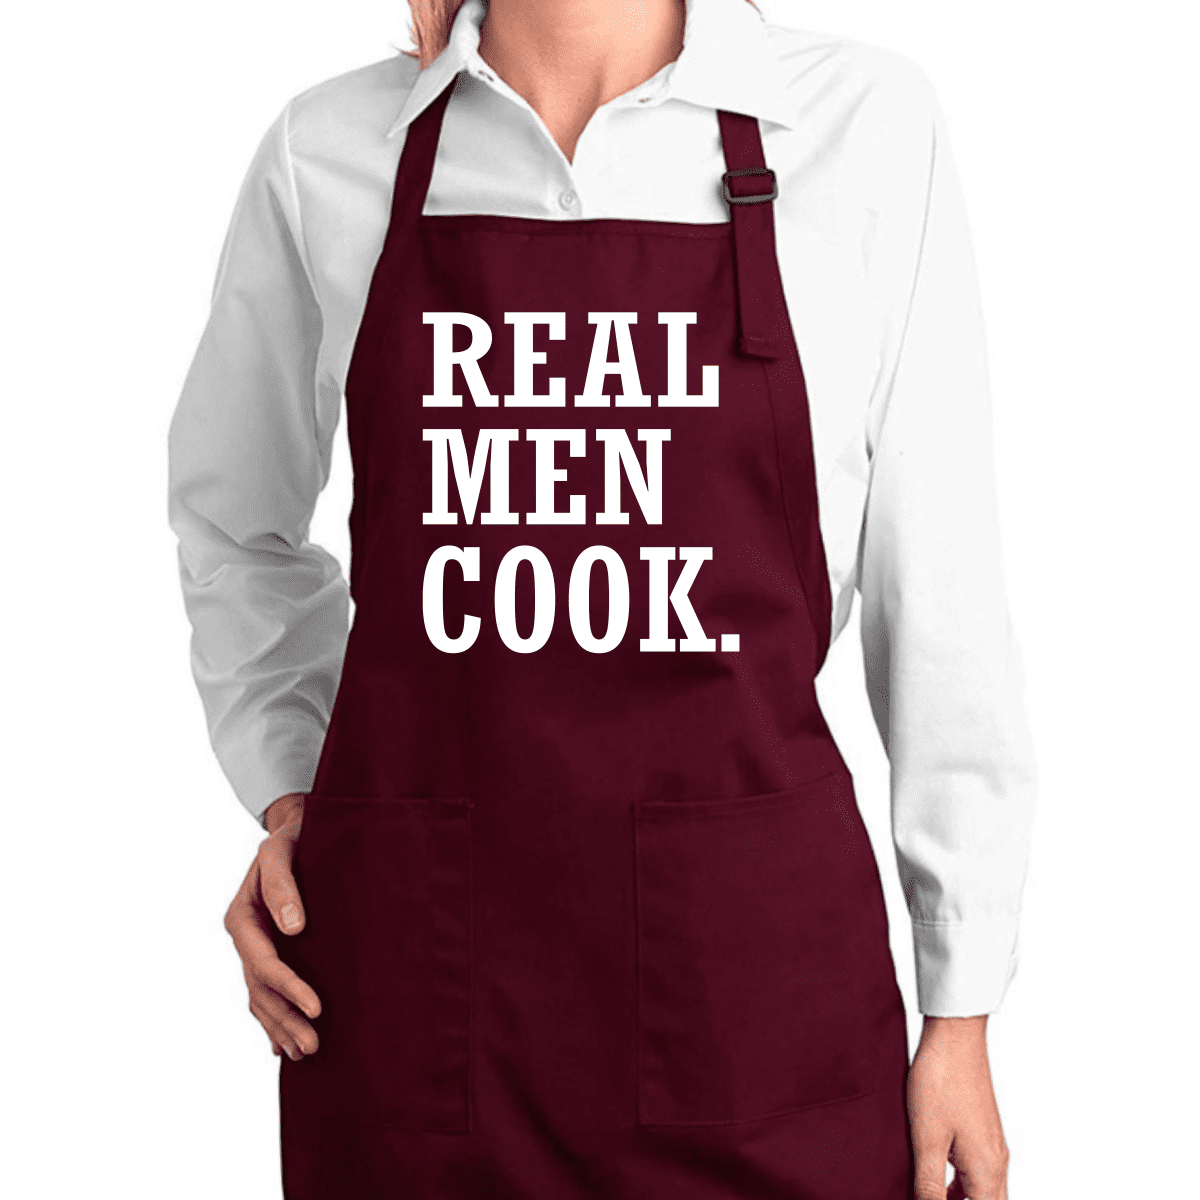 Funny Novelty Apron Kitchen Cooking Football And Beer What Else Is There 